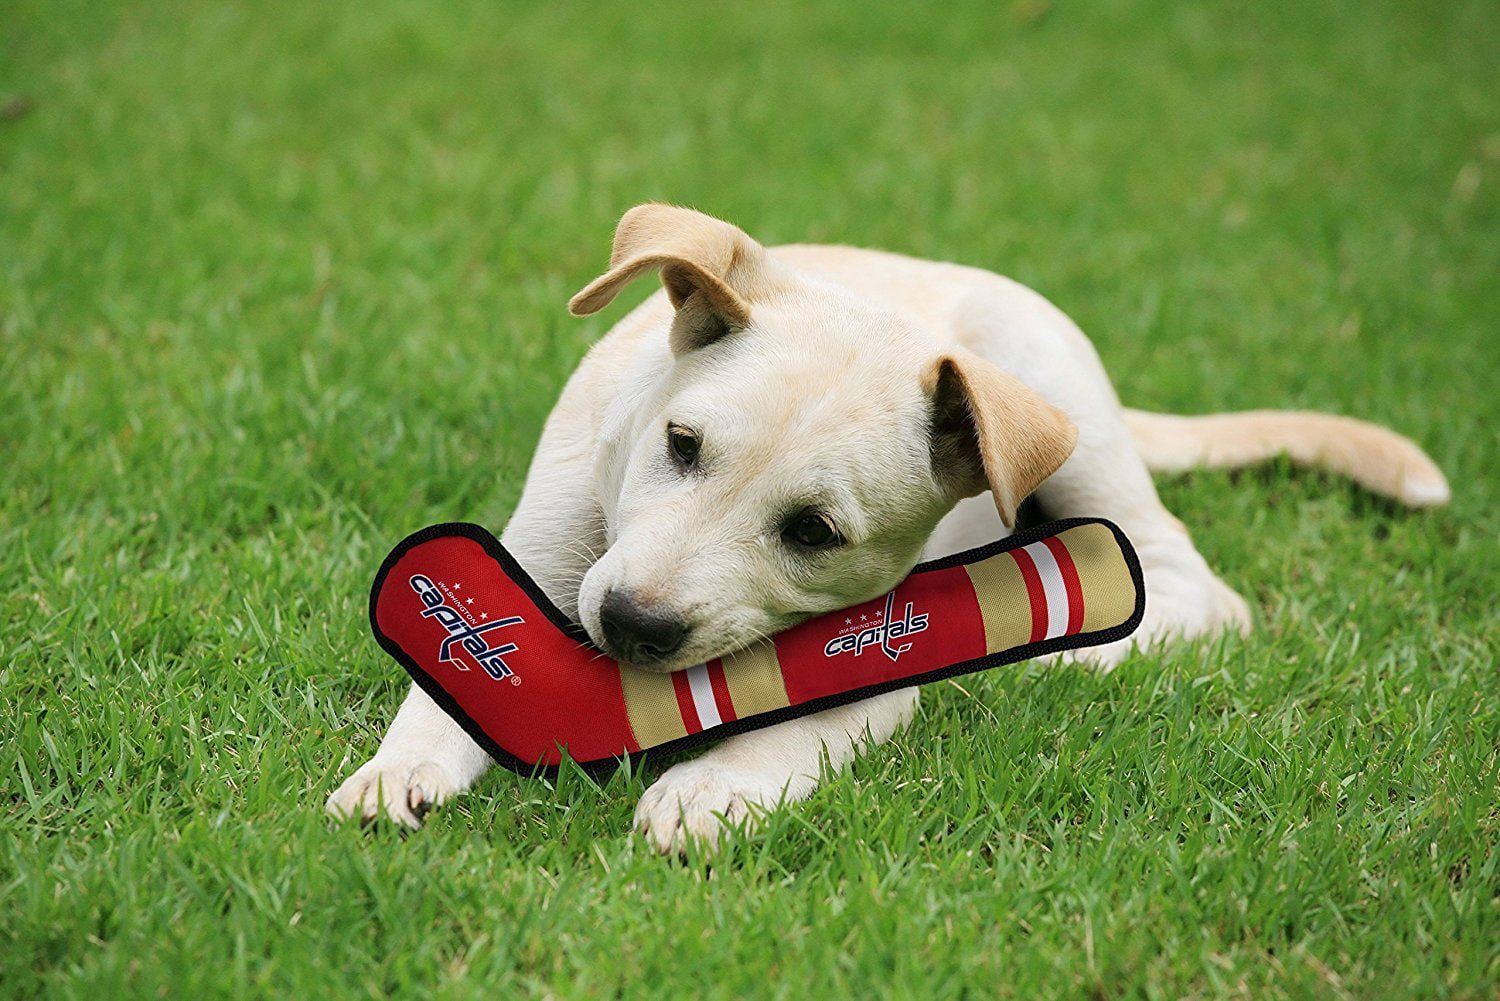 Pet Supplies : Pets First NHL Carolina Hurricanes Stick Toy for Dogs &  Cats. Play Hockey with Your Pet with This Licensed Dog Tough Toy Reward! 